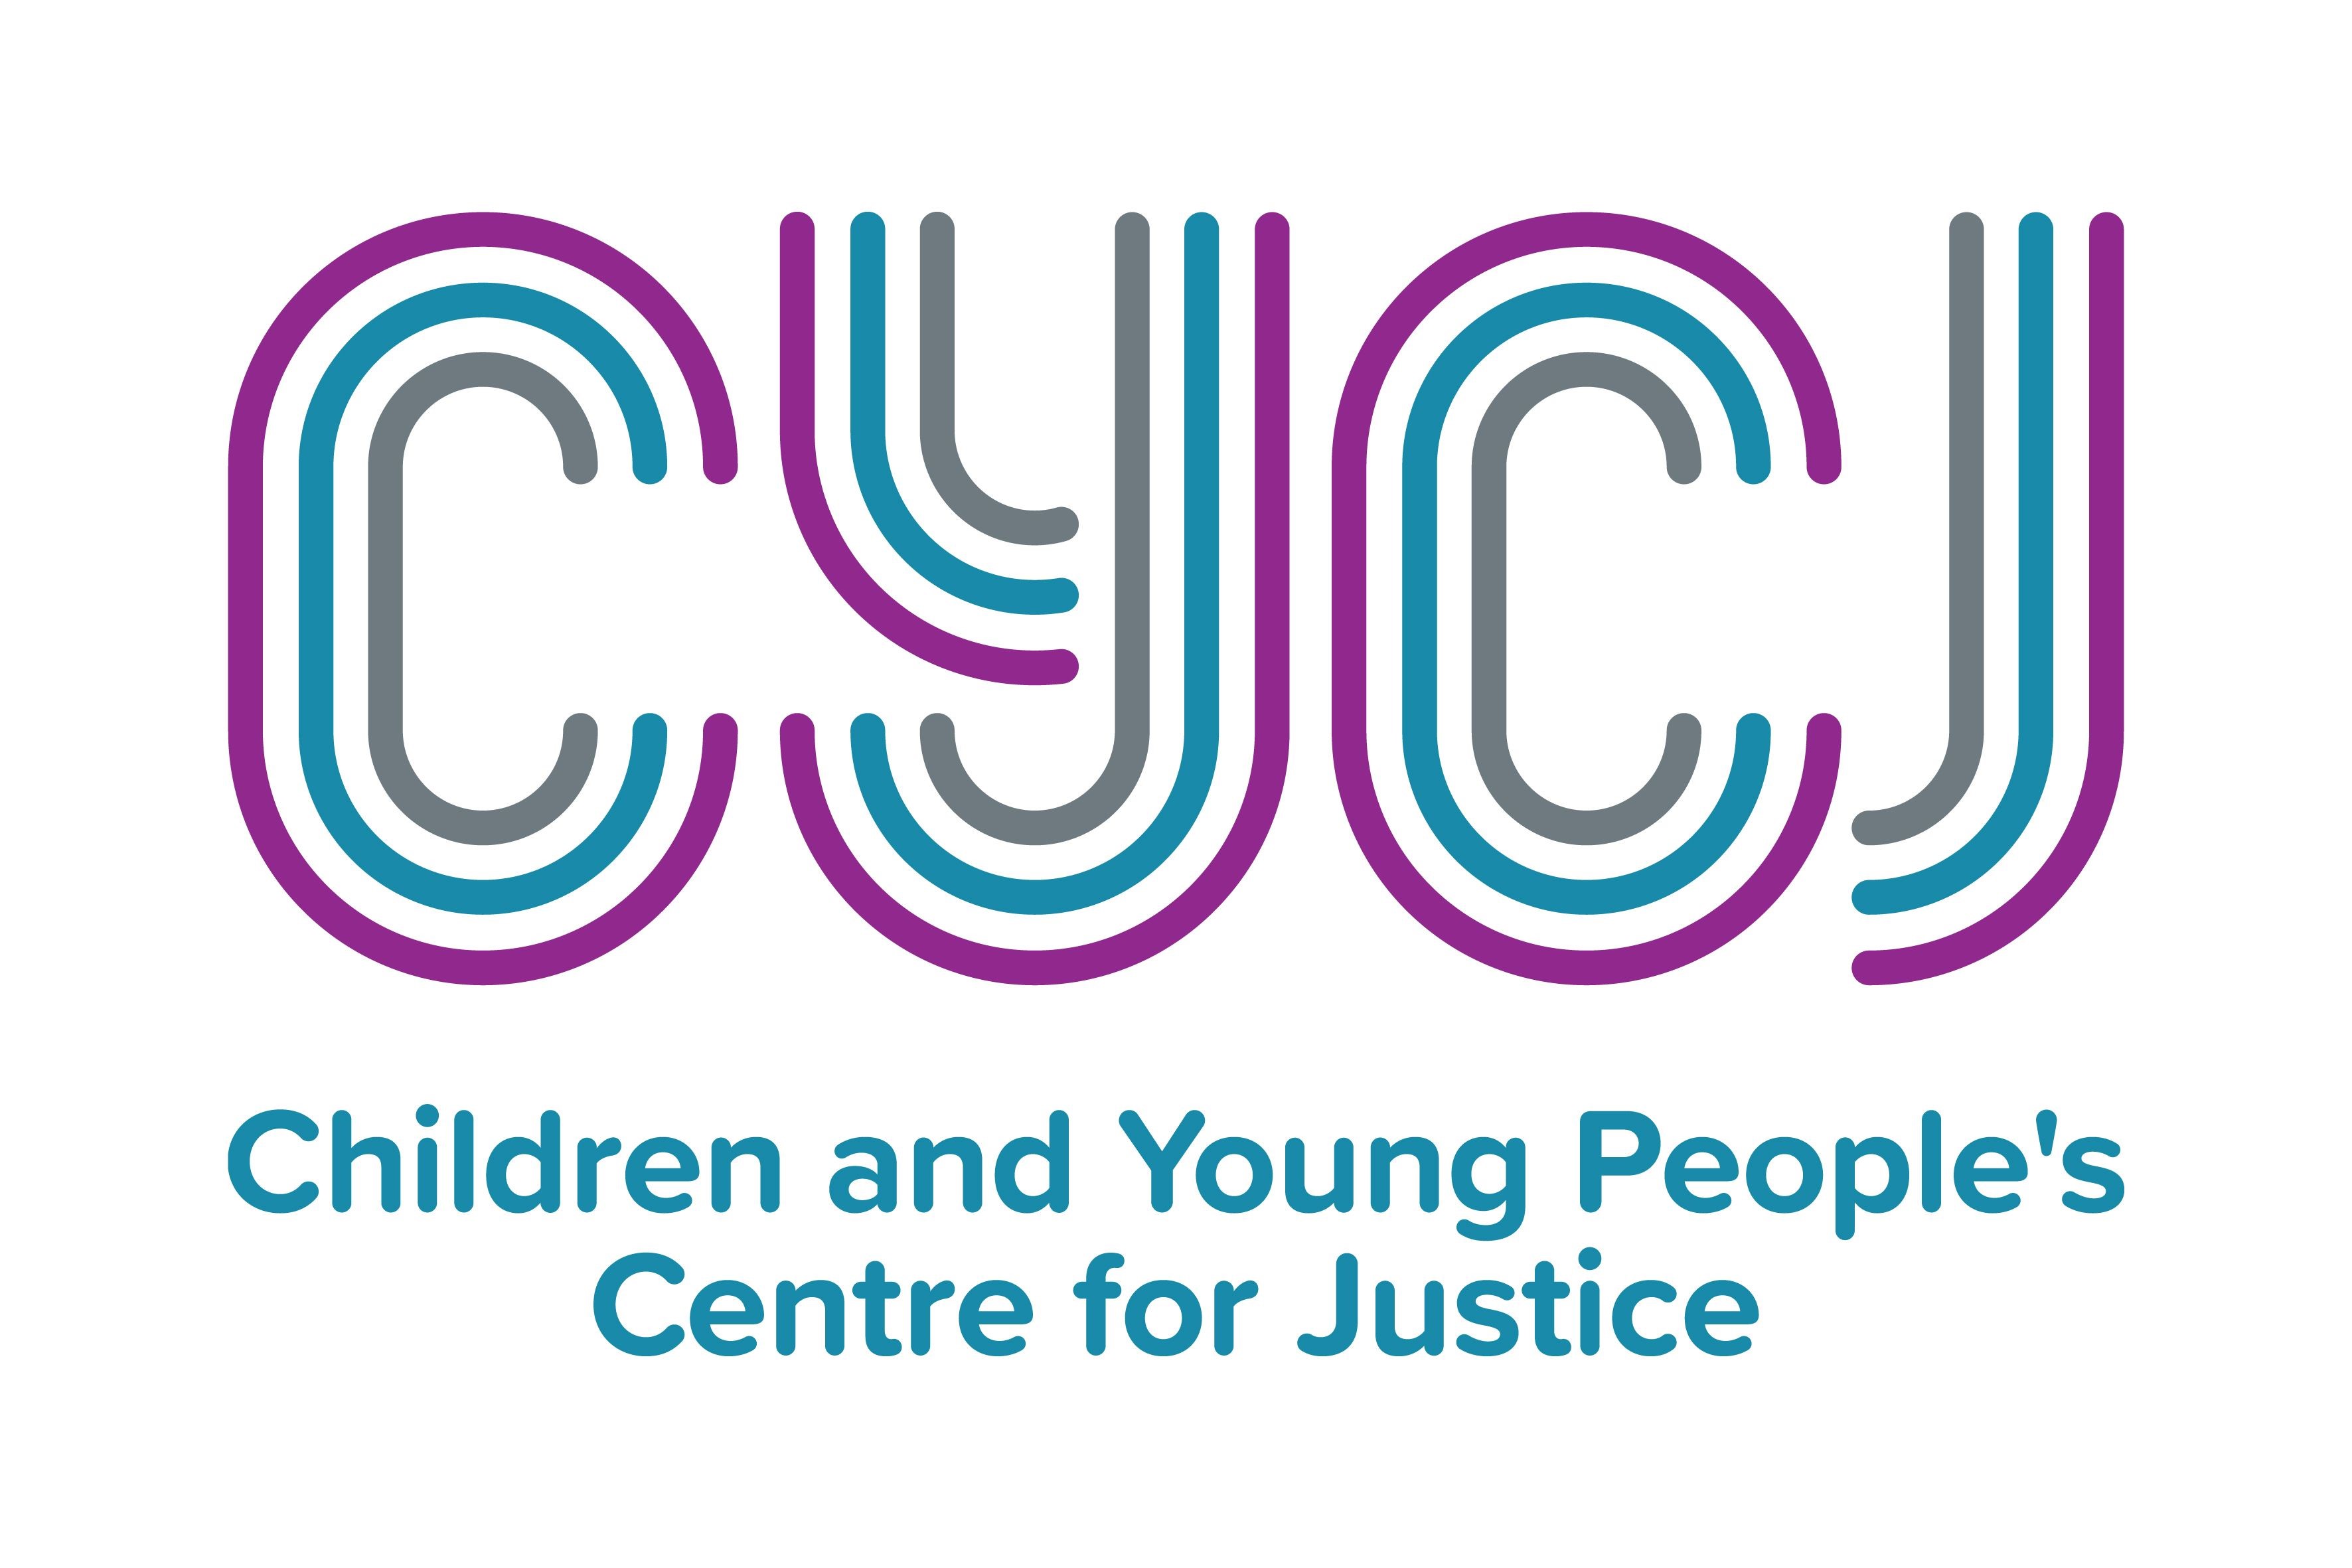 Children and Young People’s Centre for Justice